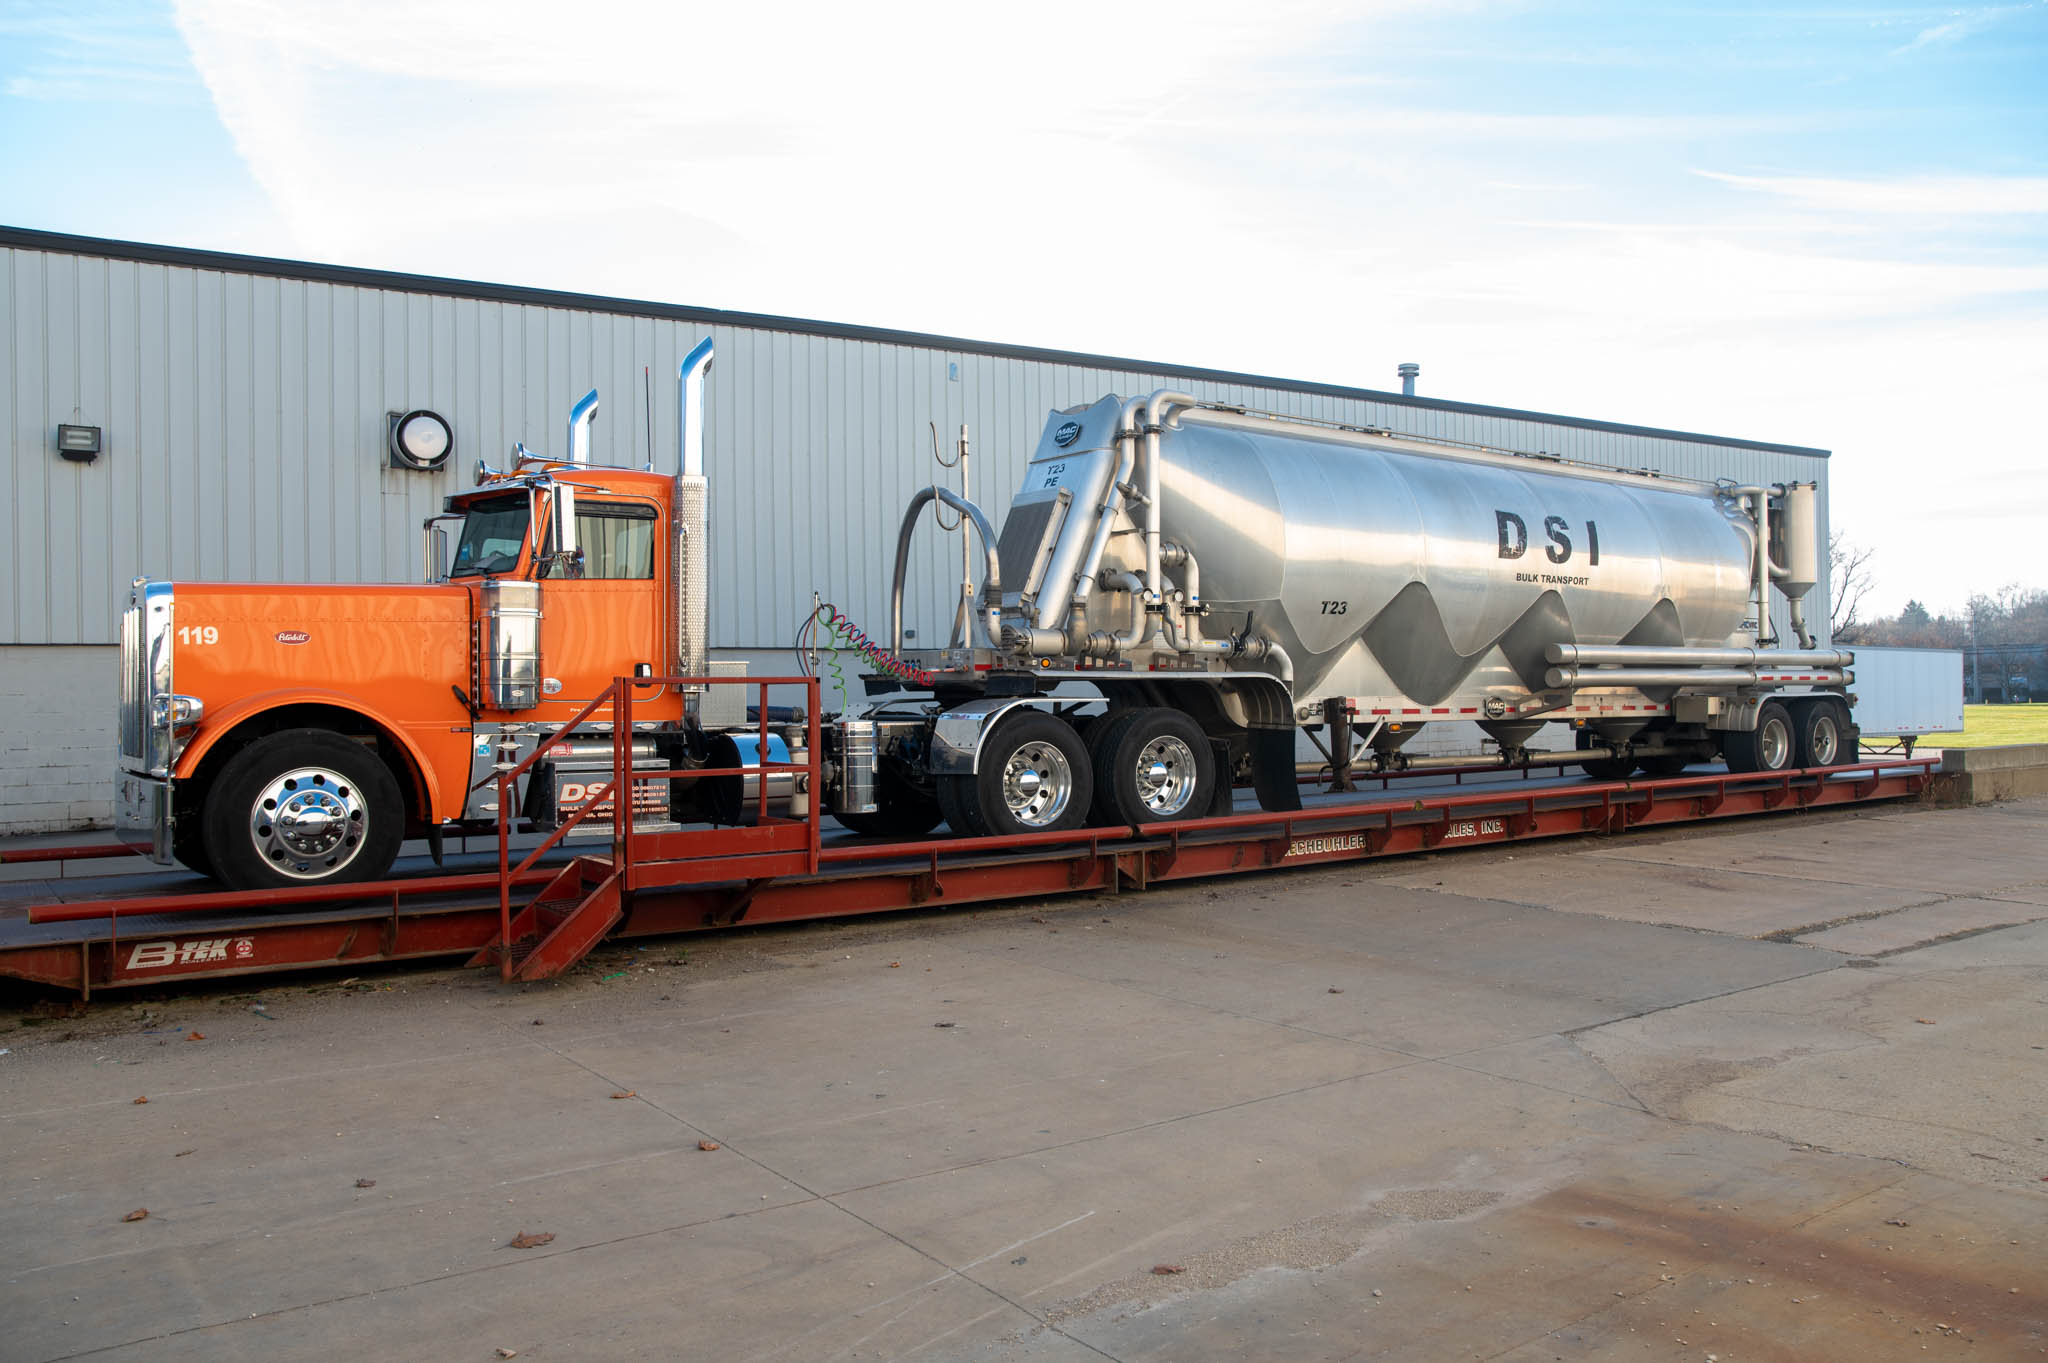 A tanker is weighed on the truck scale at ASW Global.